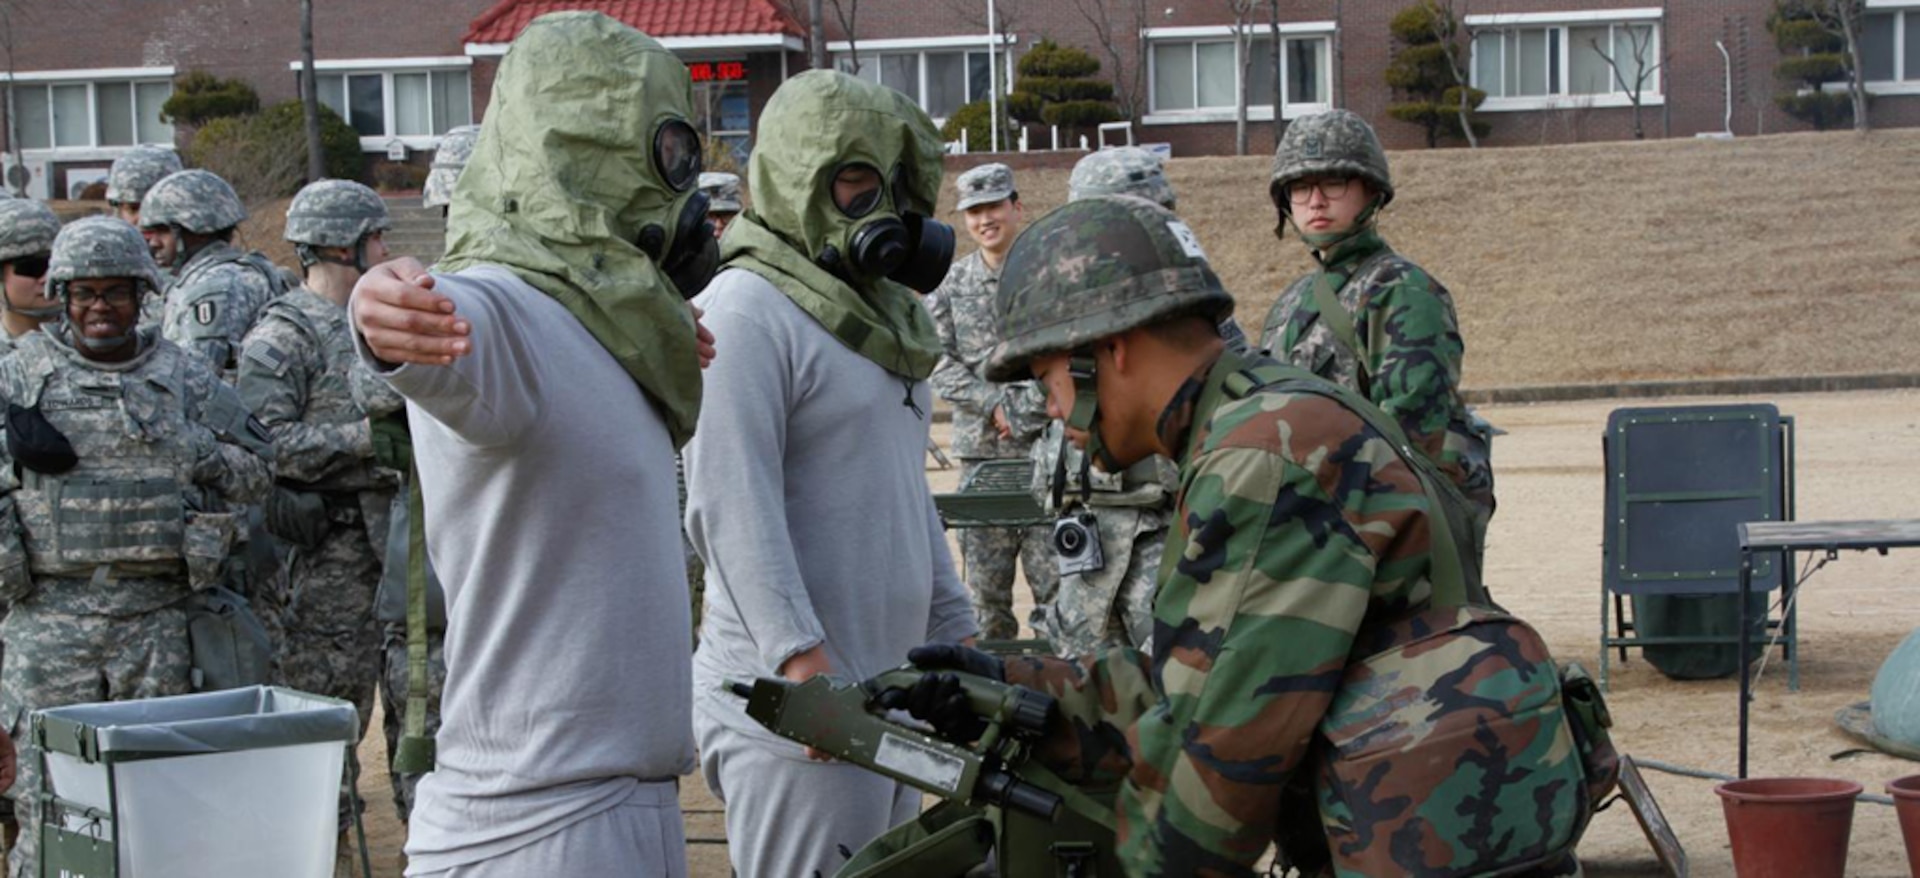 DAEGU, South Korea (Feb. 10, 2015) - Chemical, Biological, Radiological, Nuclear, and Explosives team members from the 50th Infantry Division, Republic of Korea Army, demonstrate proper decontamination clearing procedures for Soldiers, of the 293rd Signal Company, 36th Signal Battalion, 1st Signal Brigade, during a combined decontamination exercise at Base 50, Daegu.  